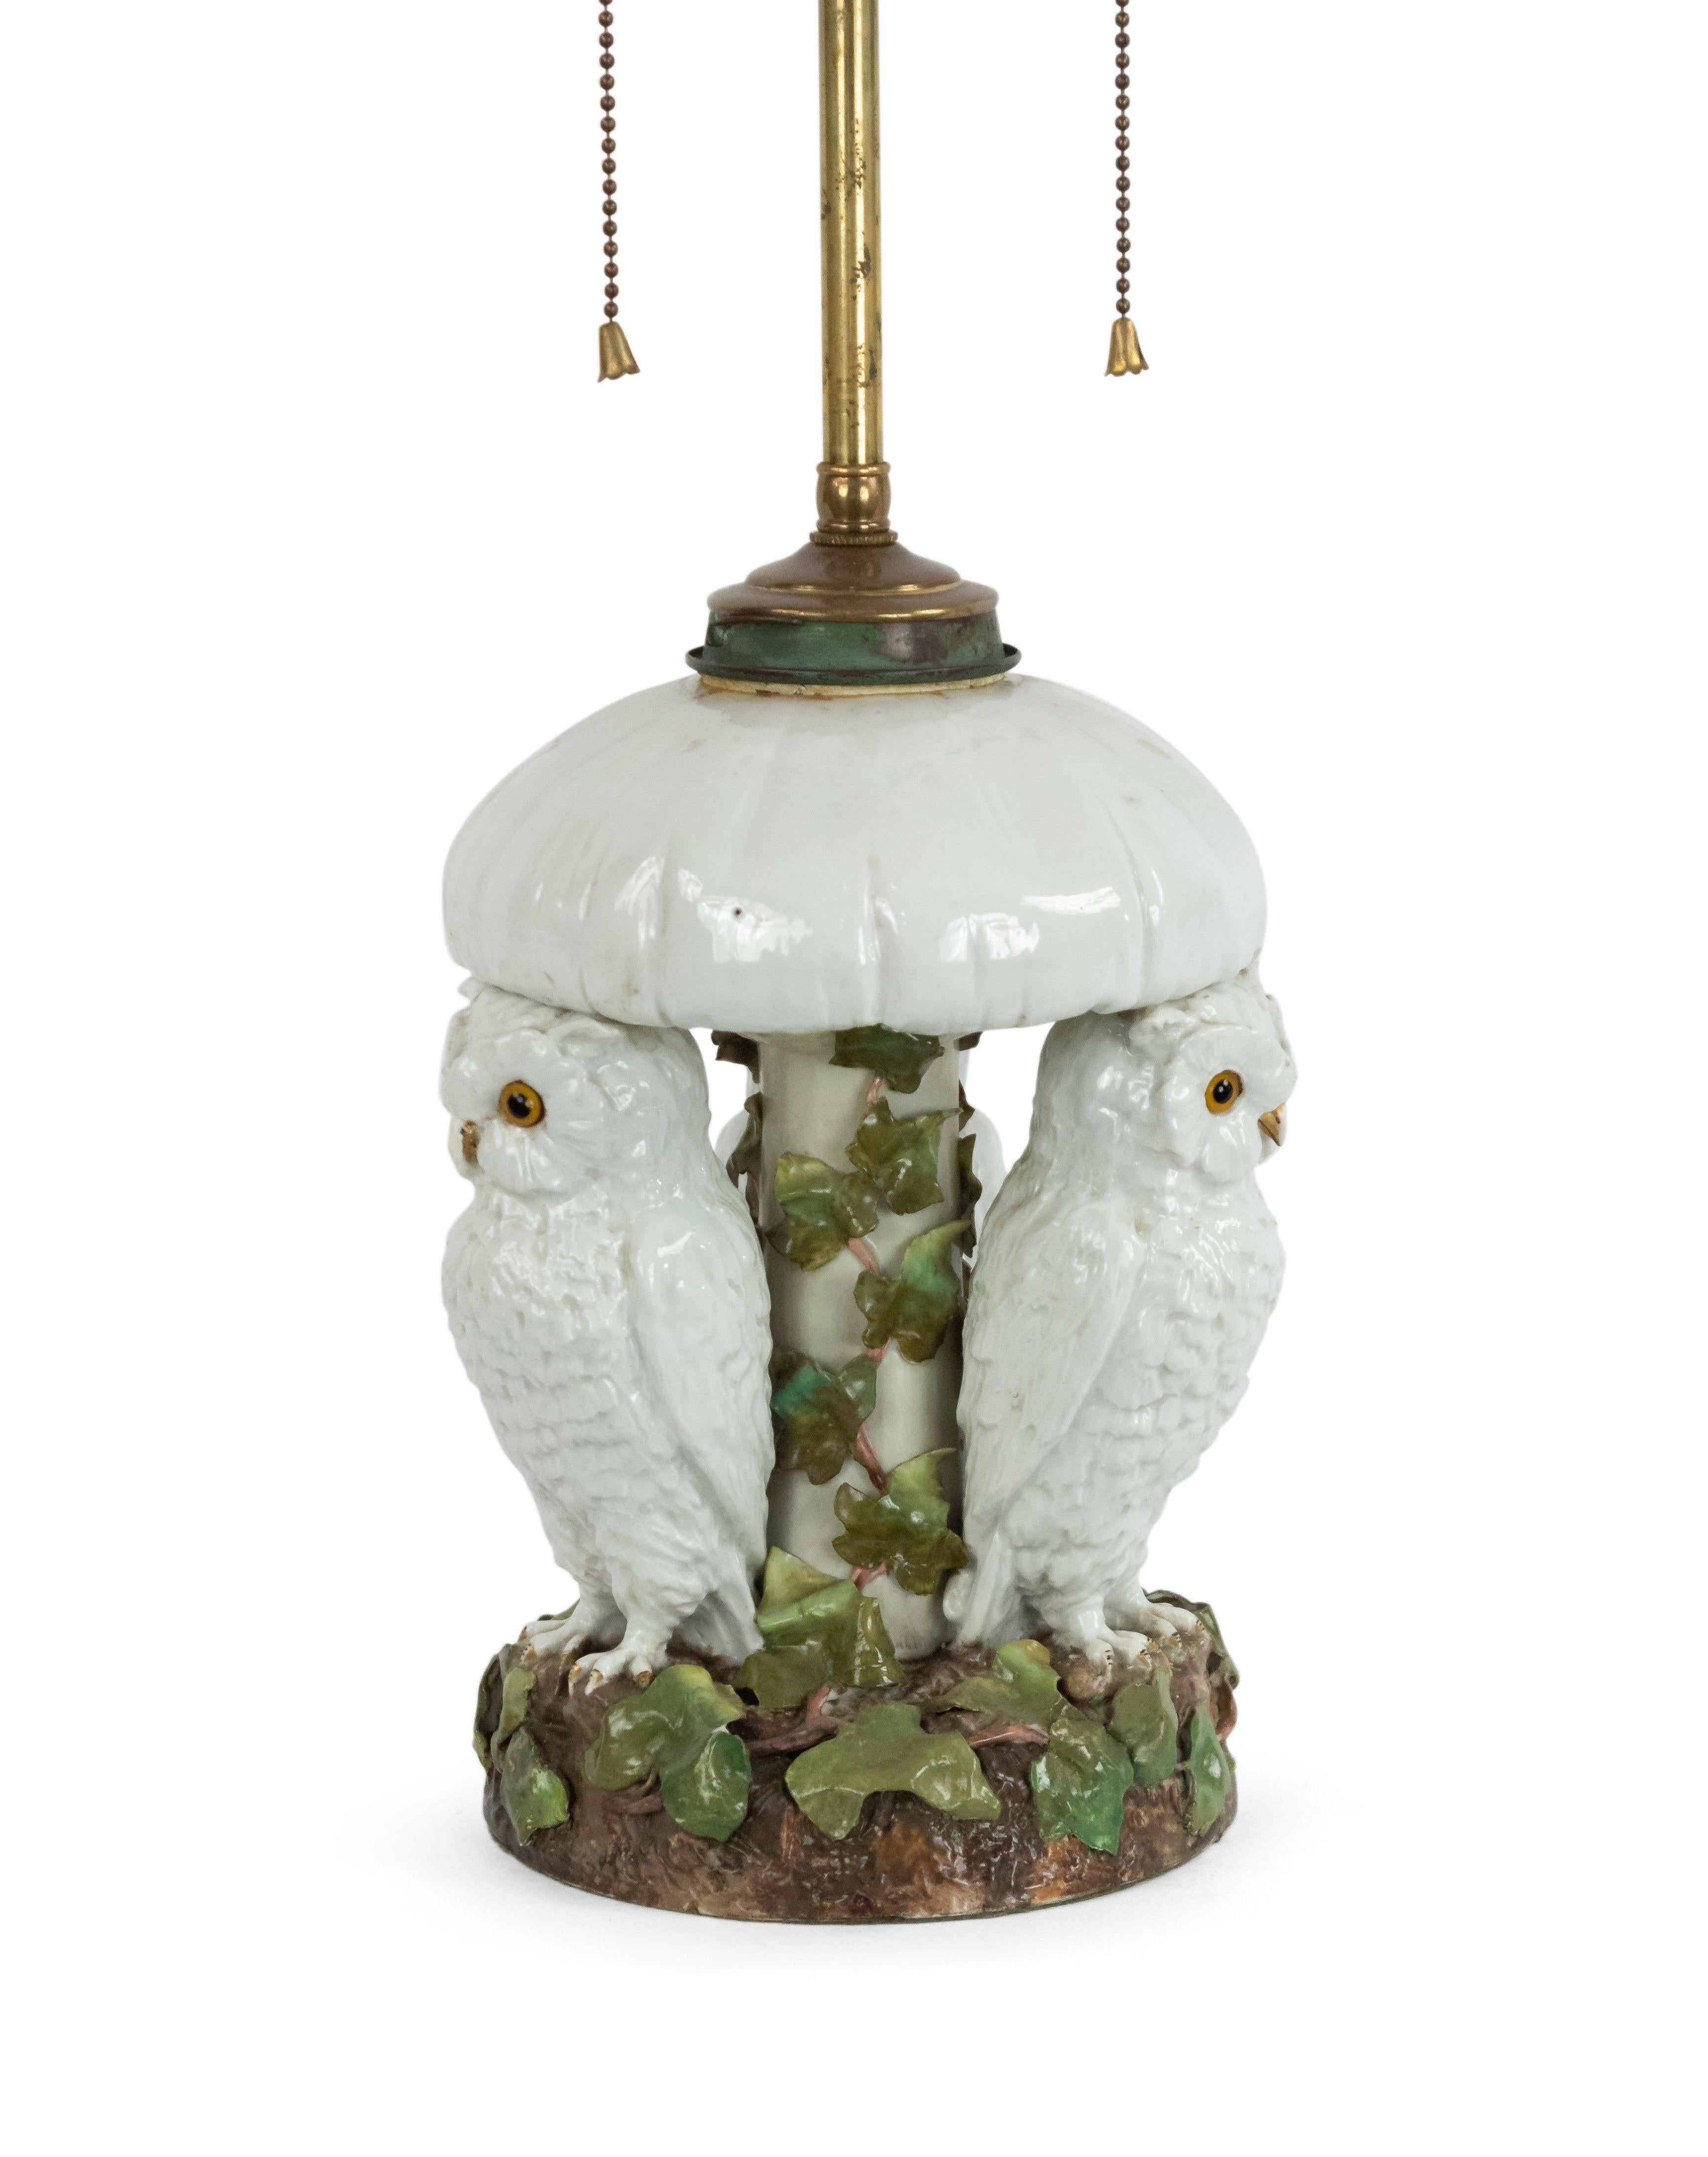 owl lamps for sale